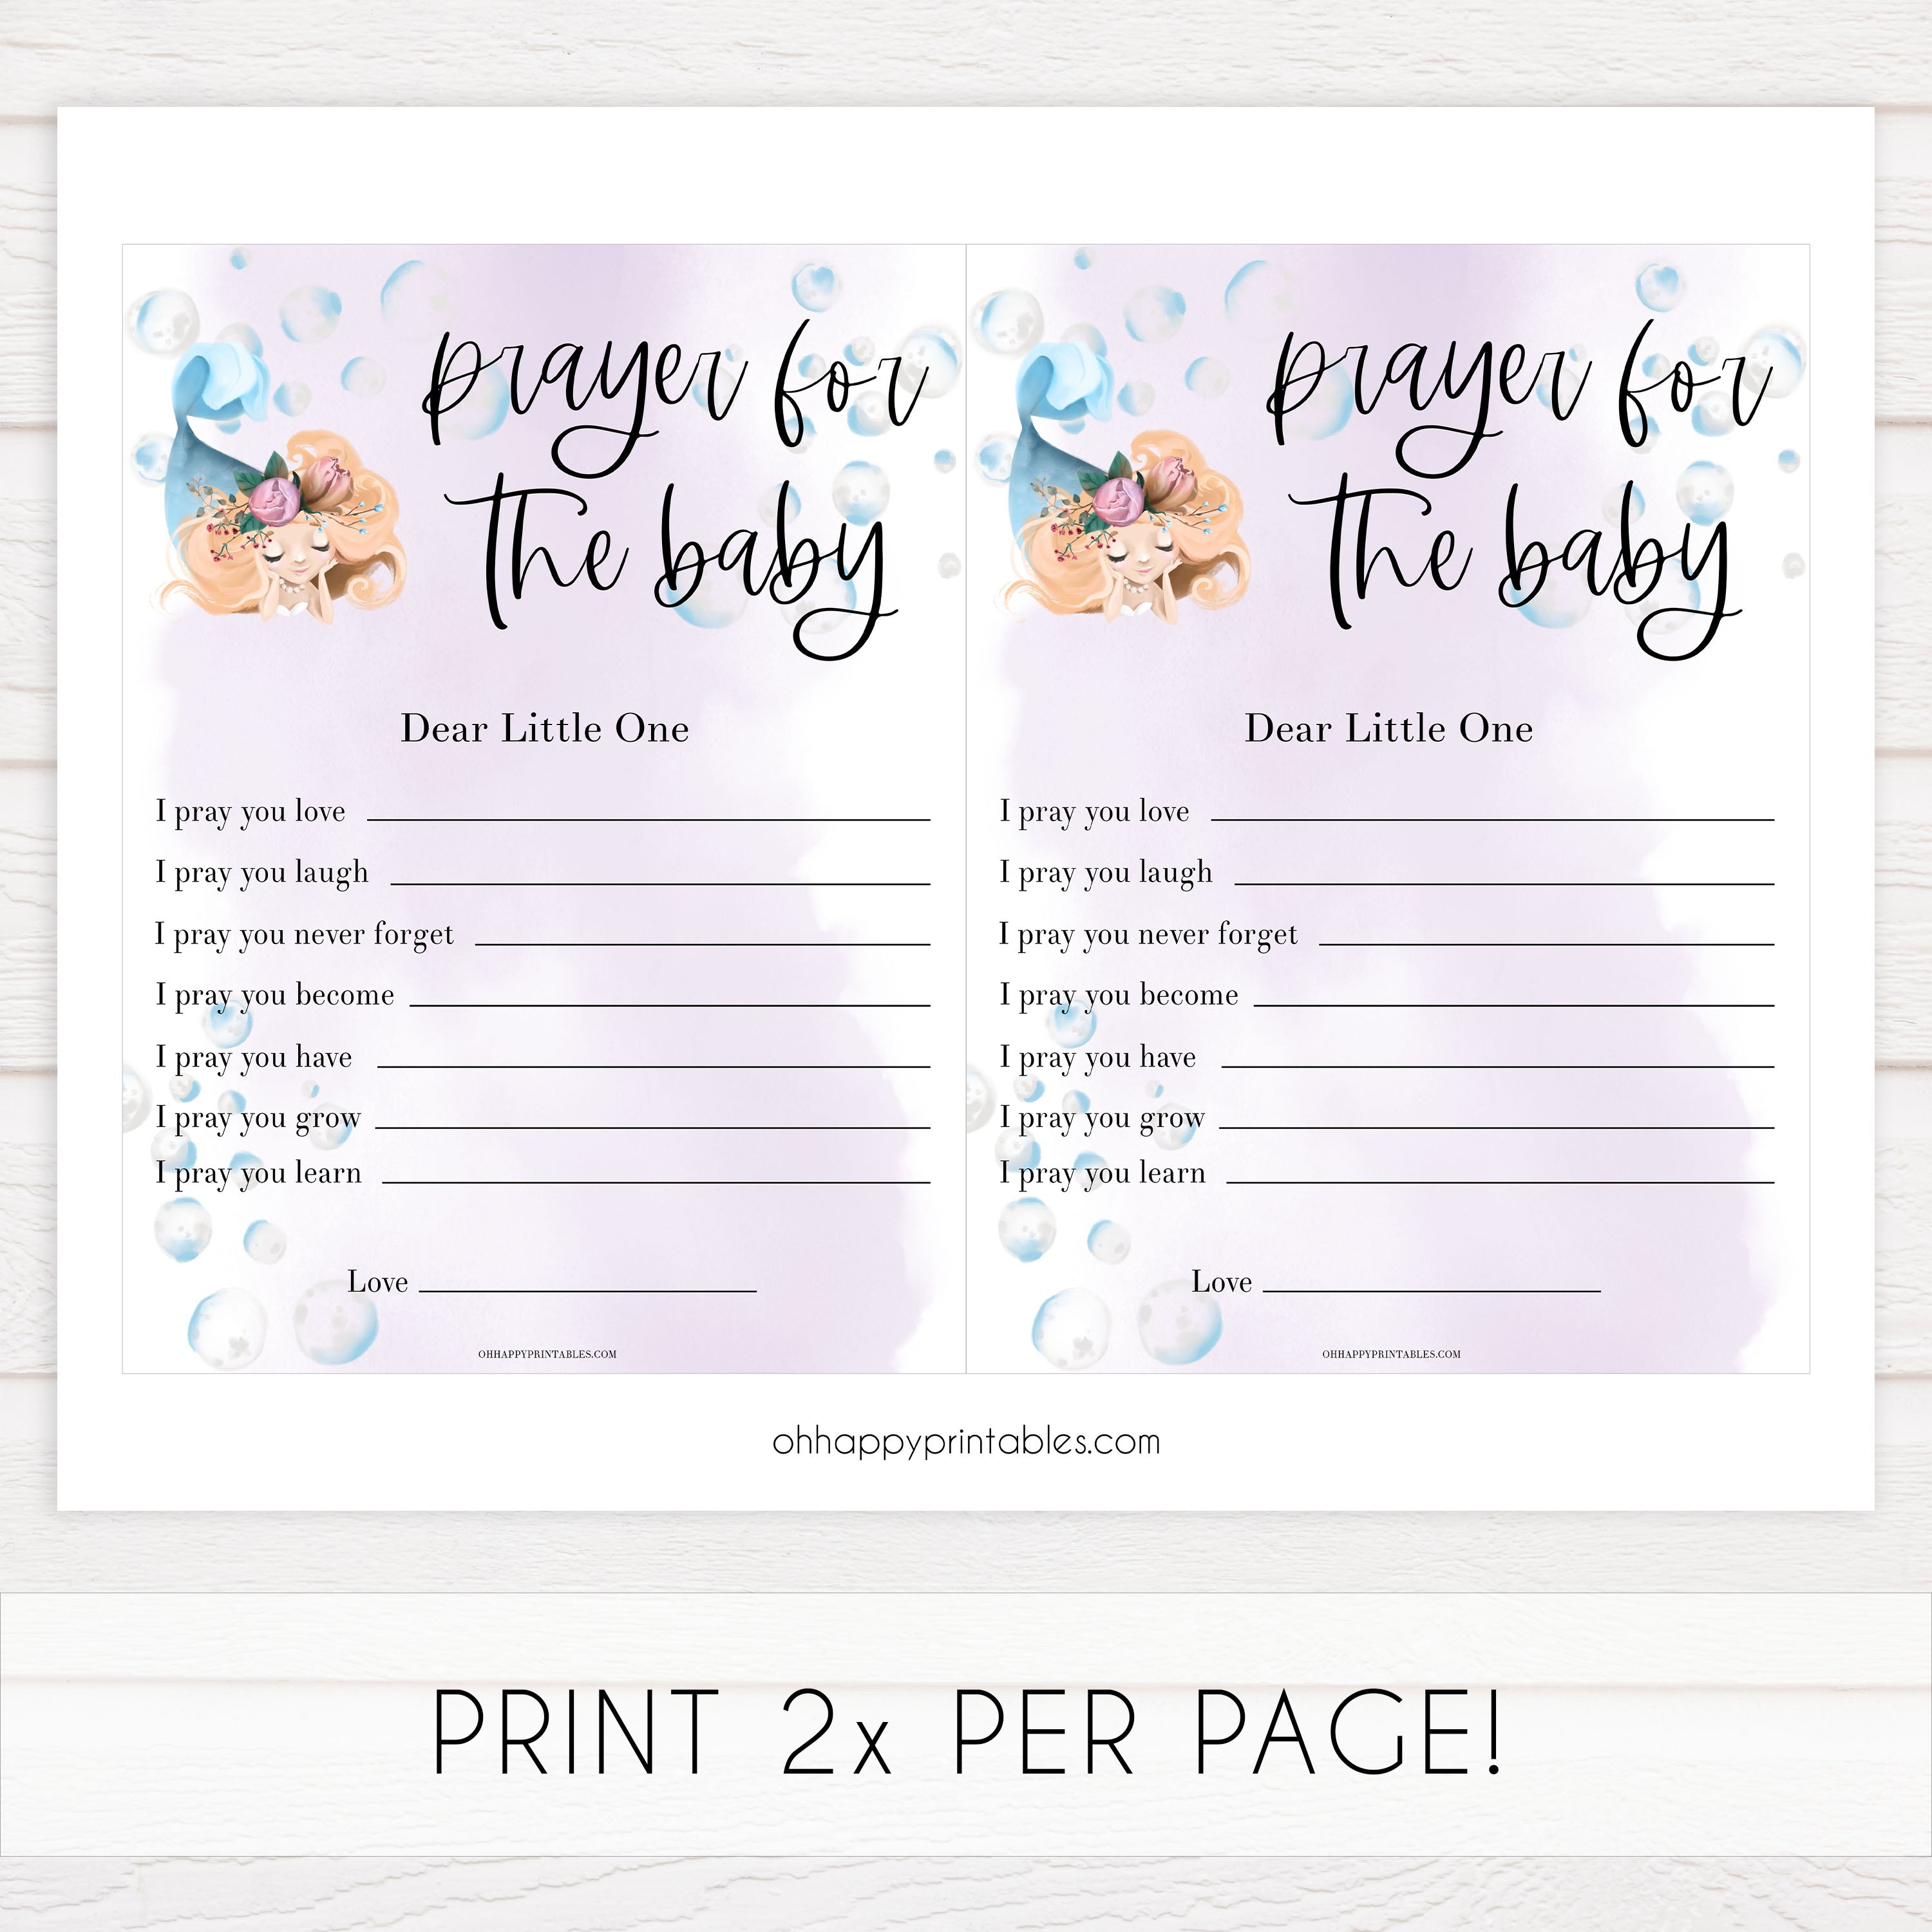 prayers for the baby game, Printable baby shower games, little mermaid baby games, baby shower games, fun baby shower ideas, top baby shower ideas, little mermaid baby shower, baby shower games, pink hearts baby shower ideas